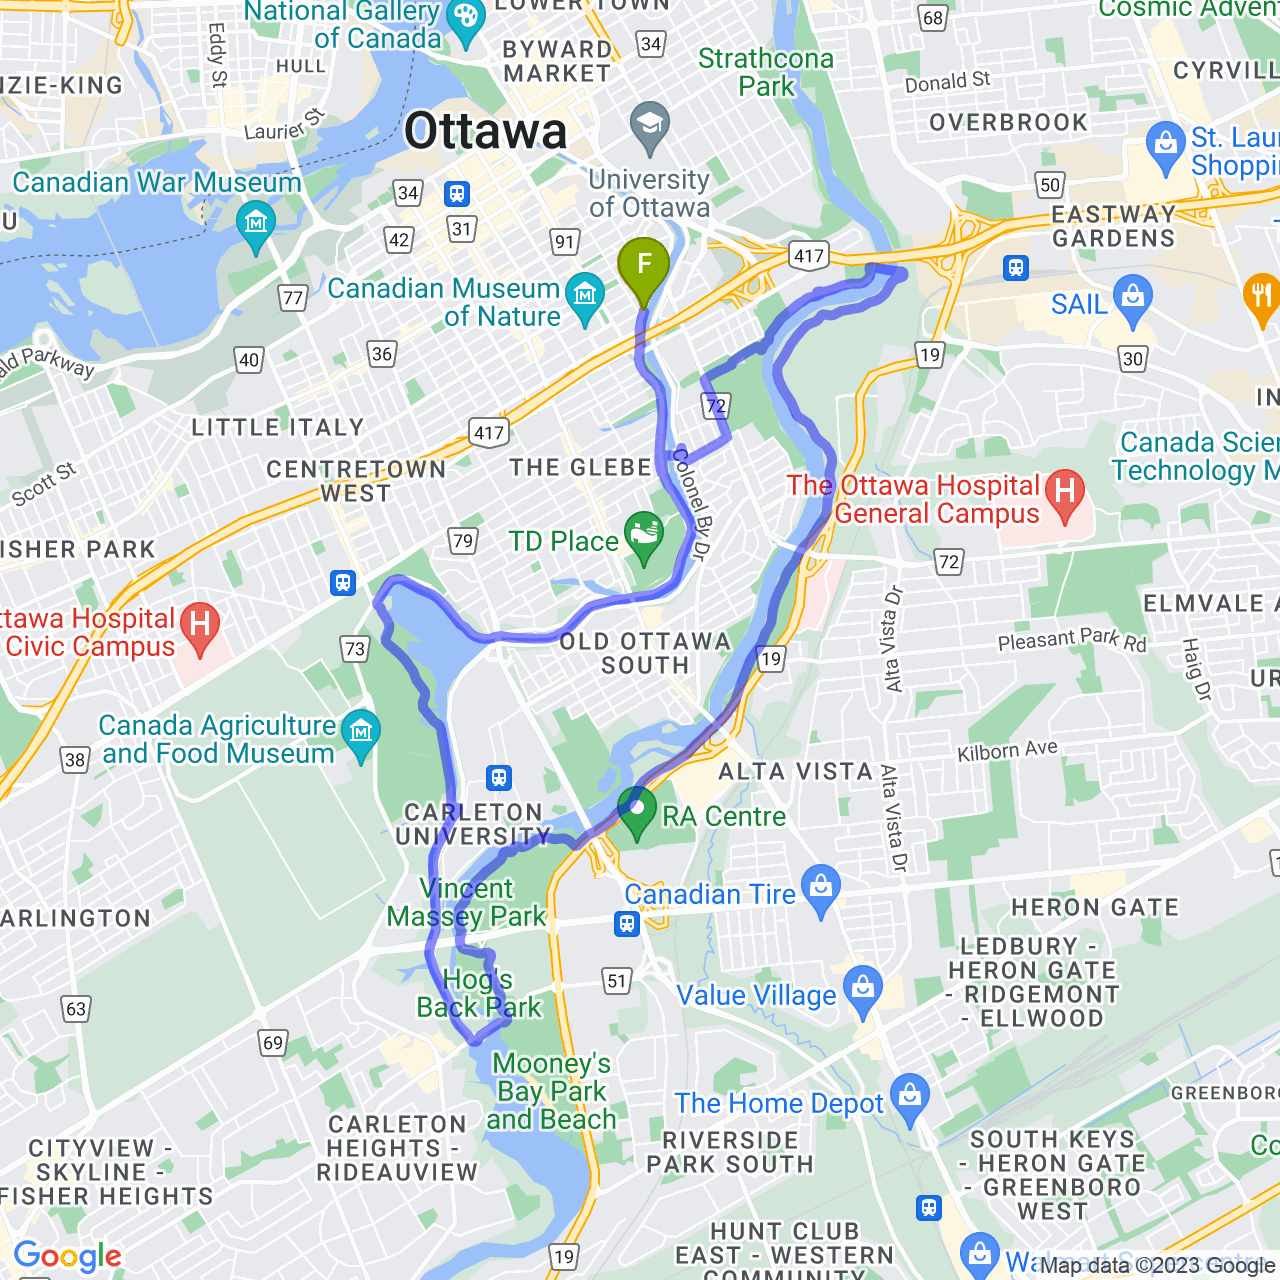 map of Night Ride by the Rideau River